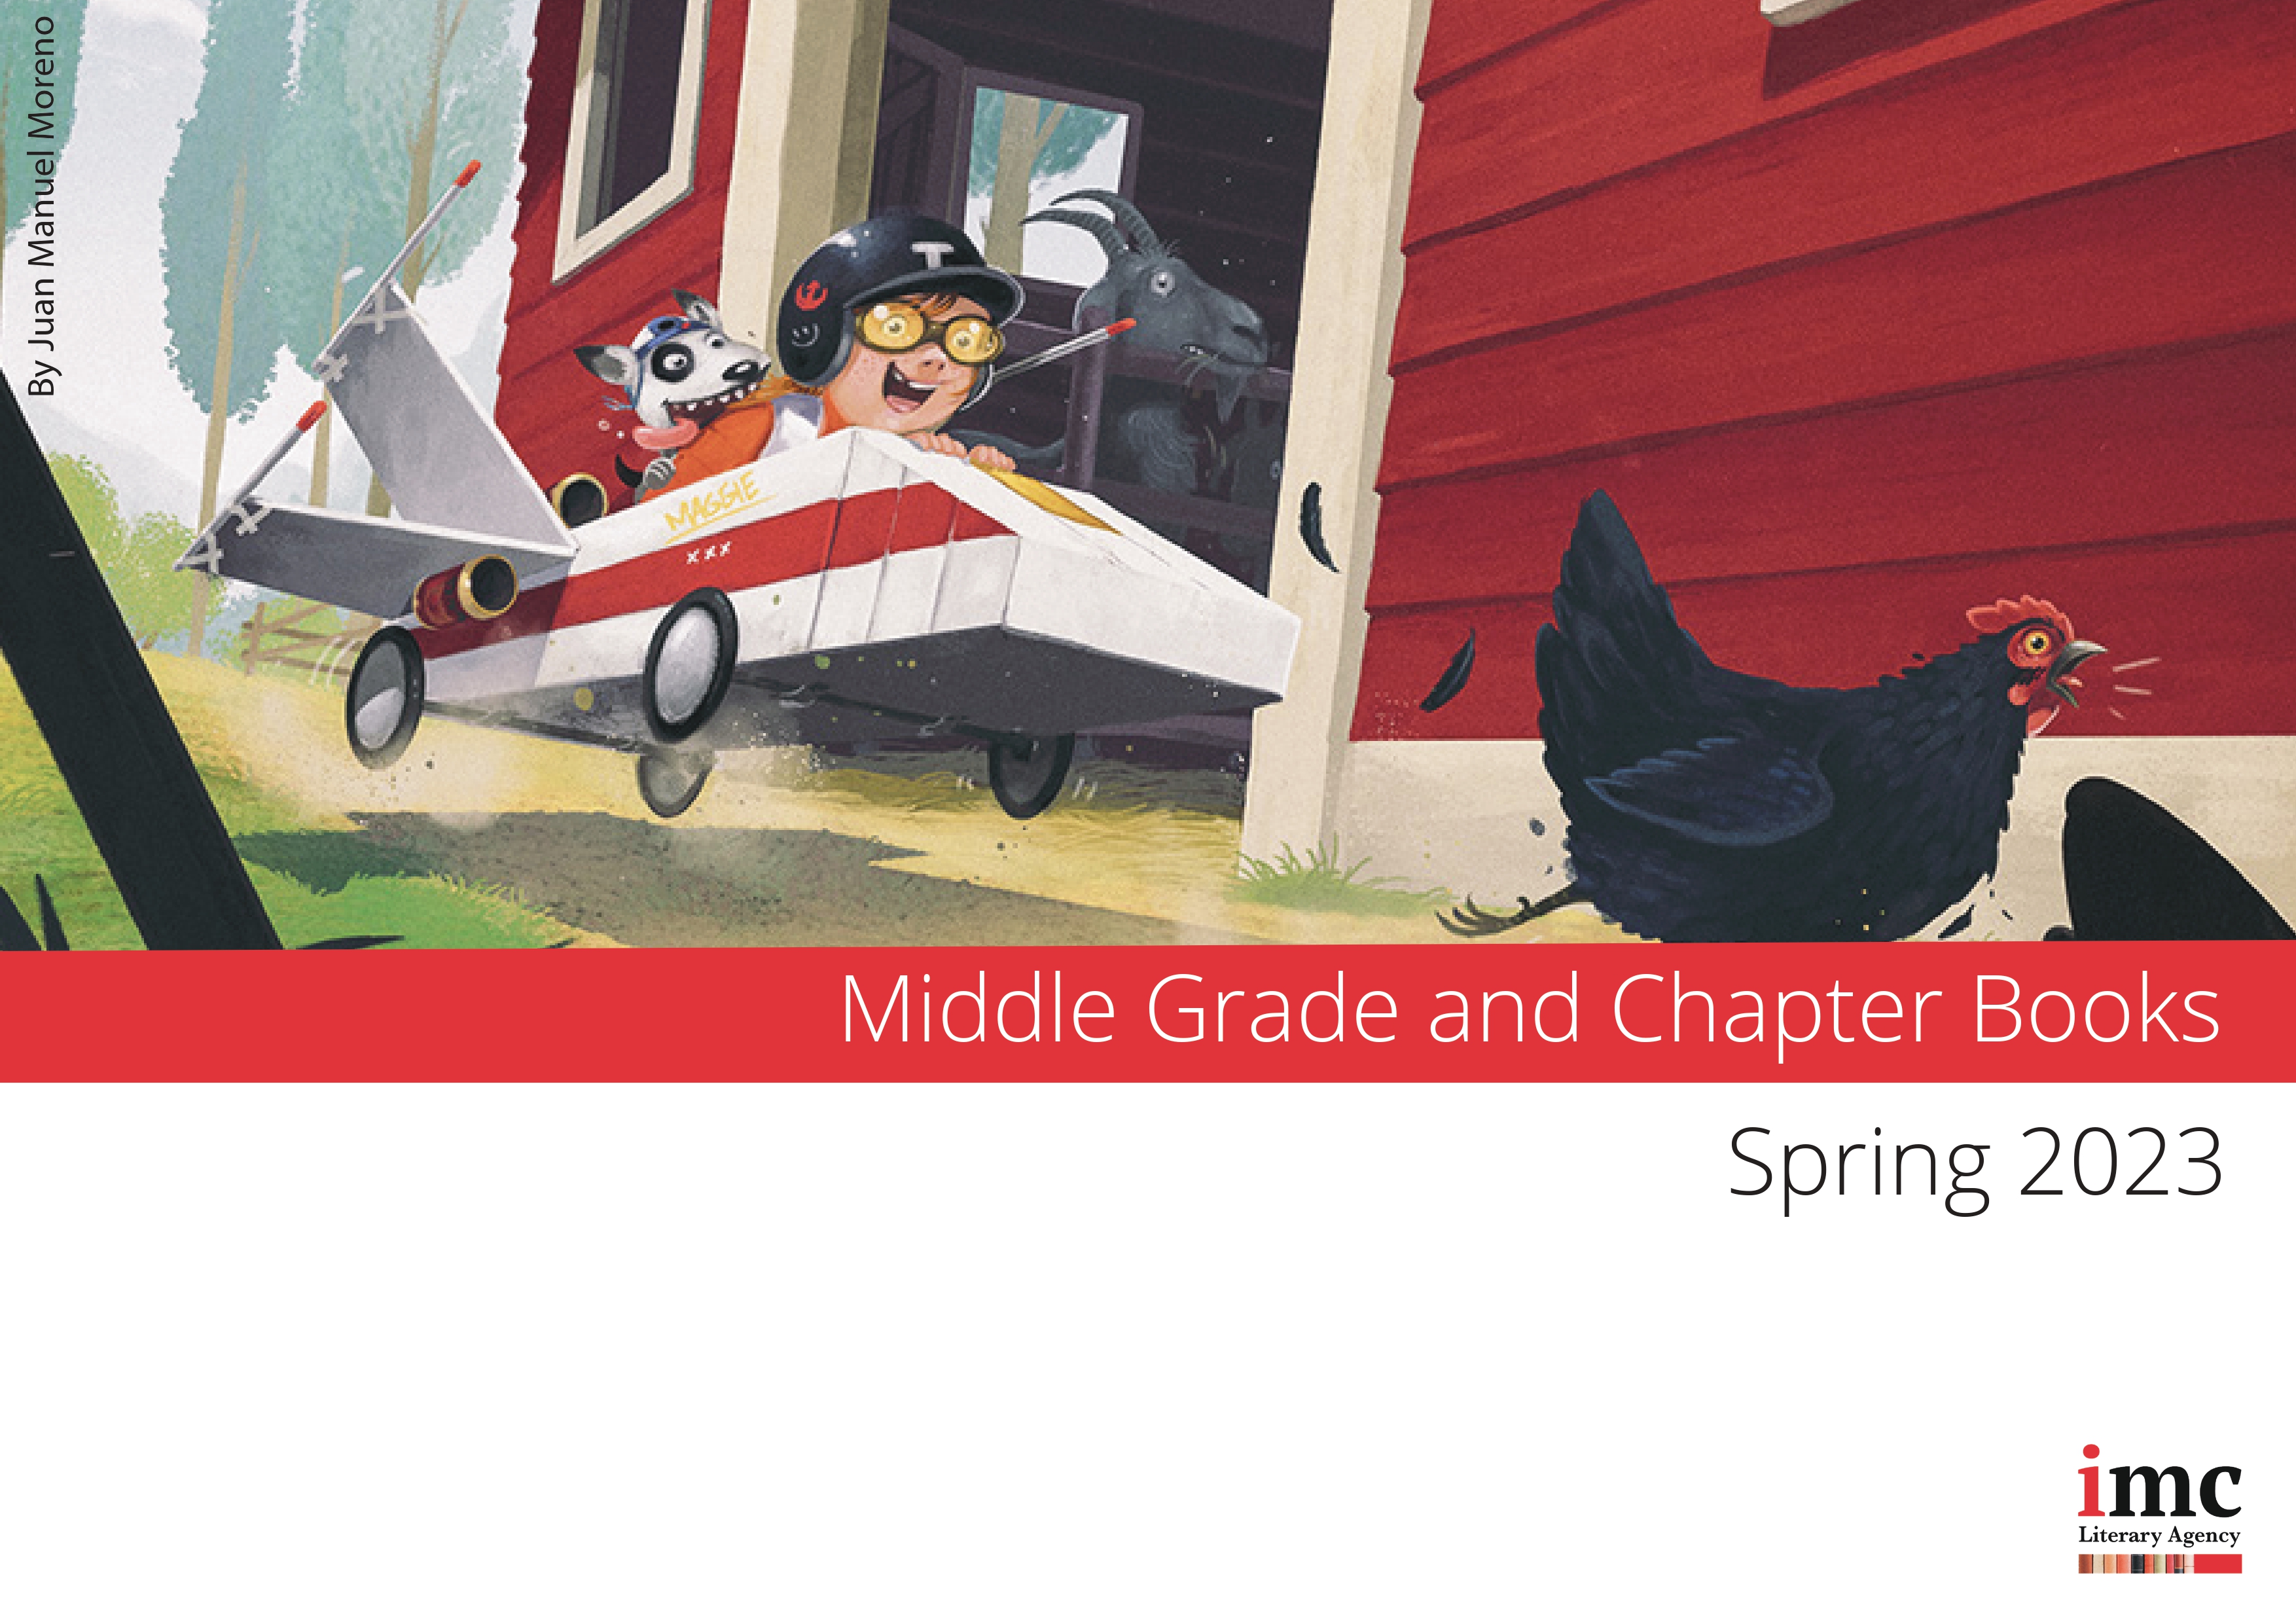 CATALOGUE MIDDLE GRADE AND CHAPTER BOOKS 2023